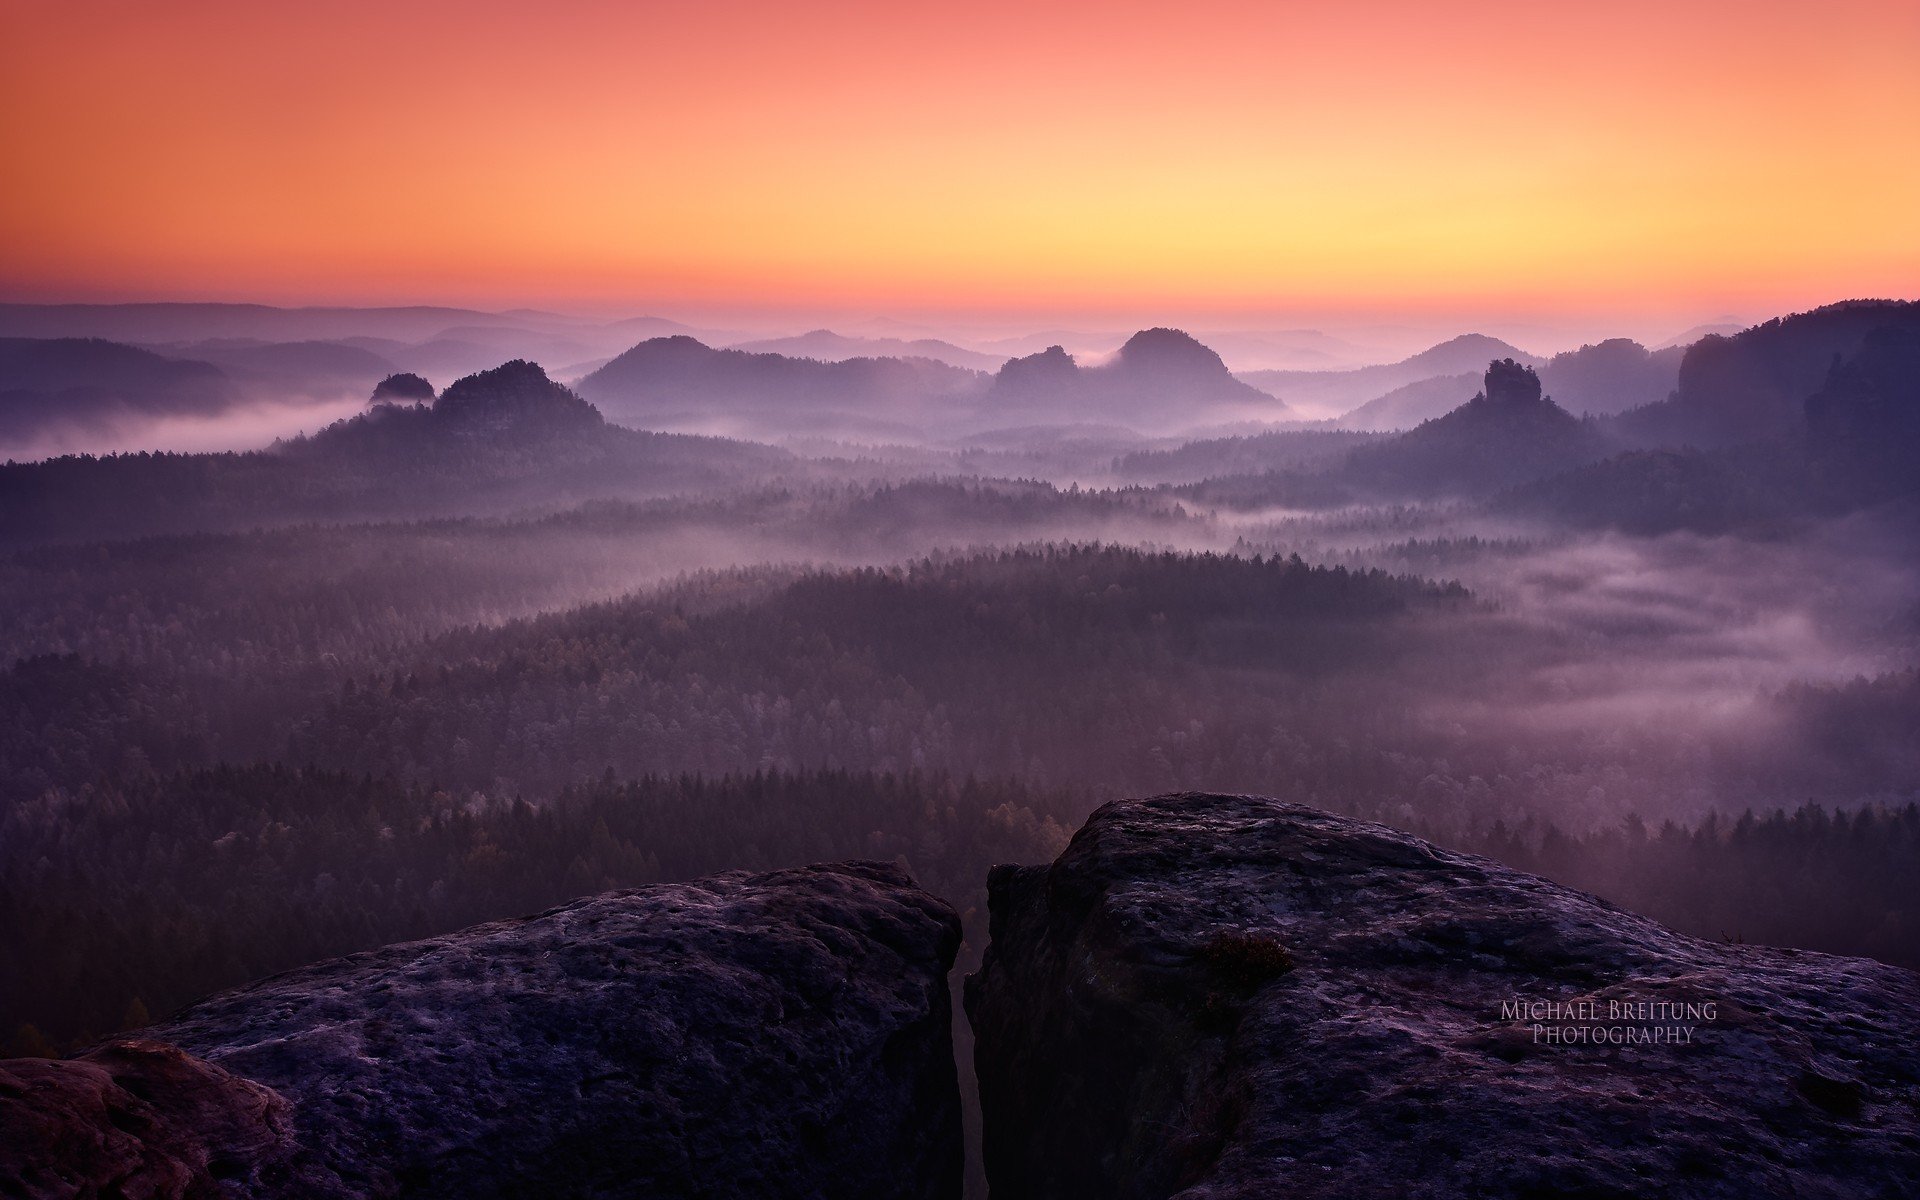 sunset, Mountains, Landscapes, Forests, Germany, Mist, Hdr, Photography, Saxon, Switzerland Wallpaper